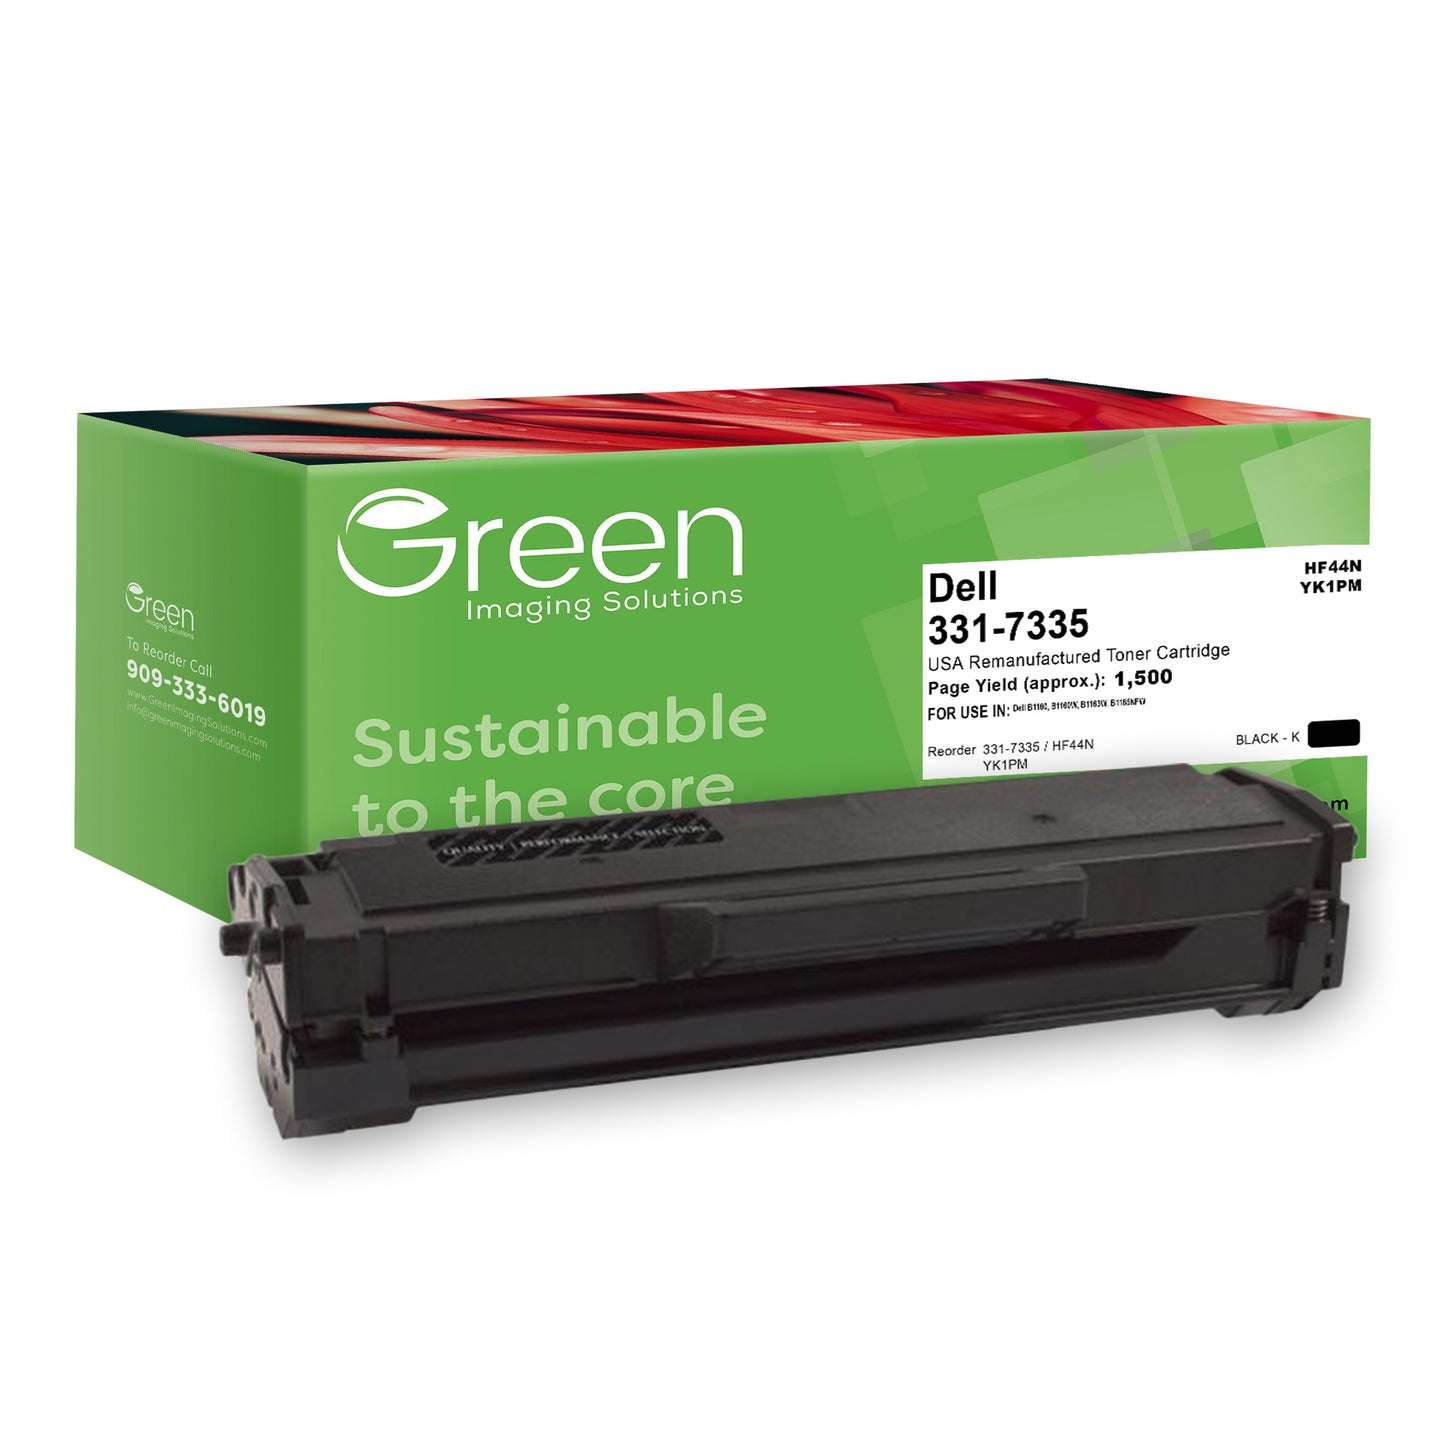 Green Imaging Solutions USA Remanufactured Toner Cartridge for Dell B1160